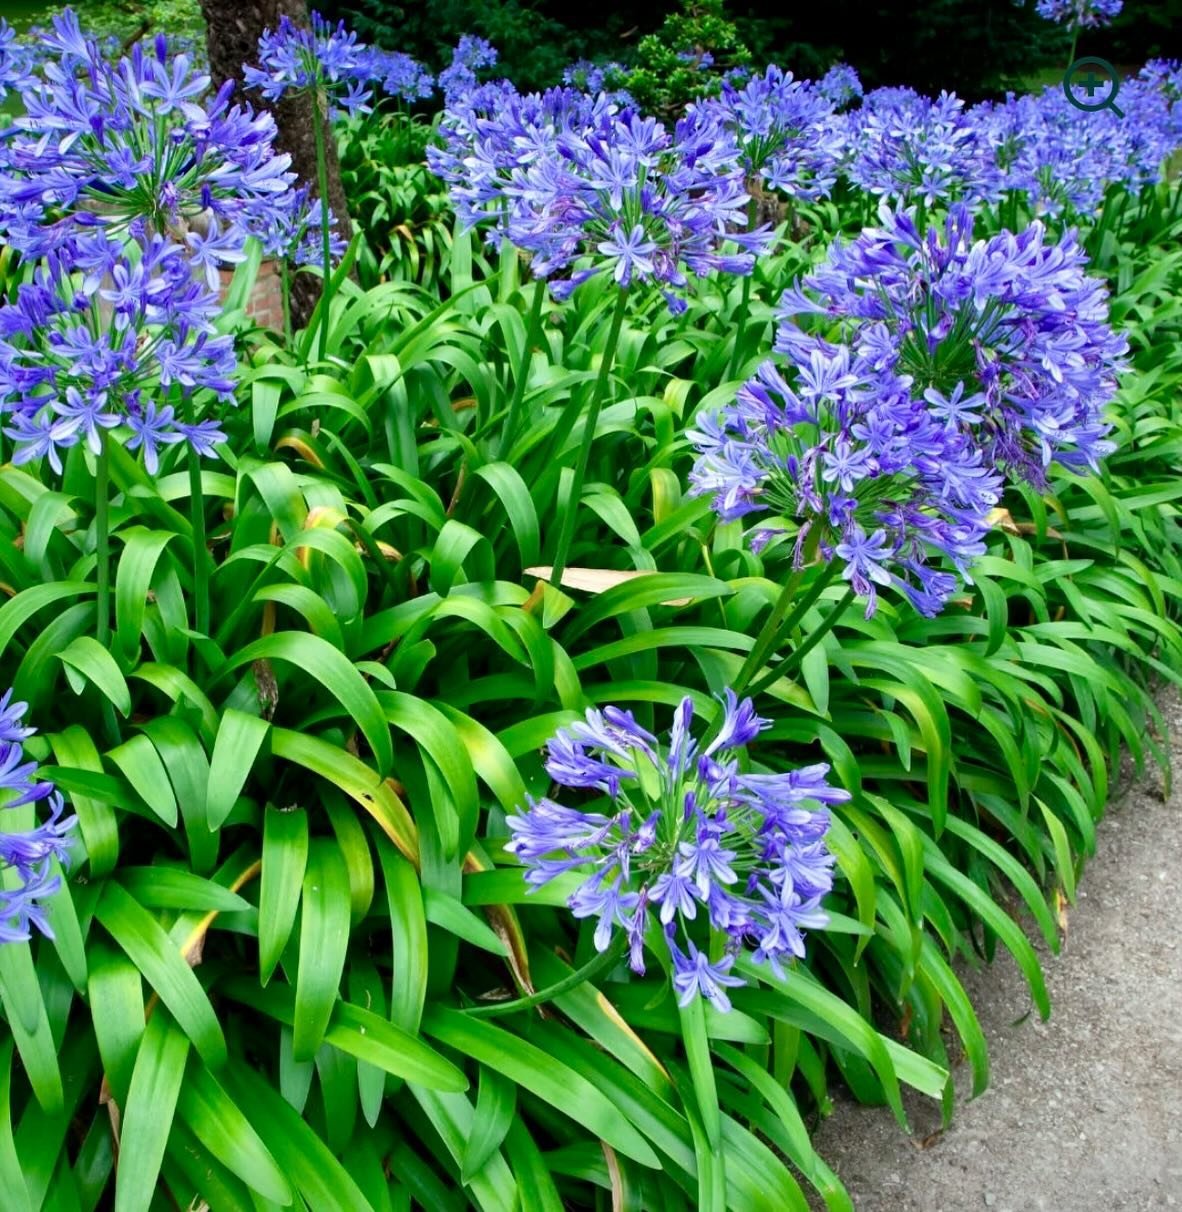 An all time favorite &hellip; Agapanthus. Native to Mozambique, these tropical beauties work fantastically as seasonal color in pots in areas where freezing temps make them otherwise incompatible. It&rsquo;s hard not to smile when seeing them planted